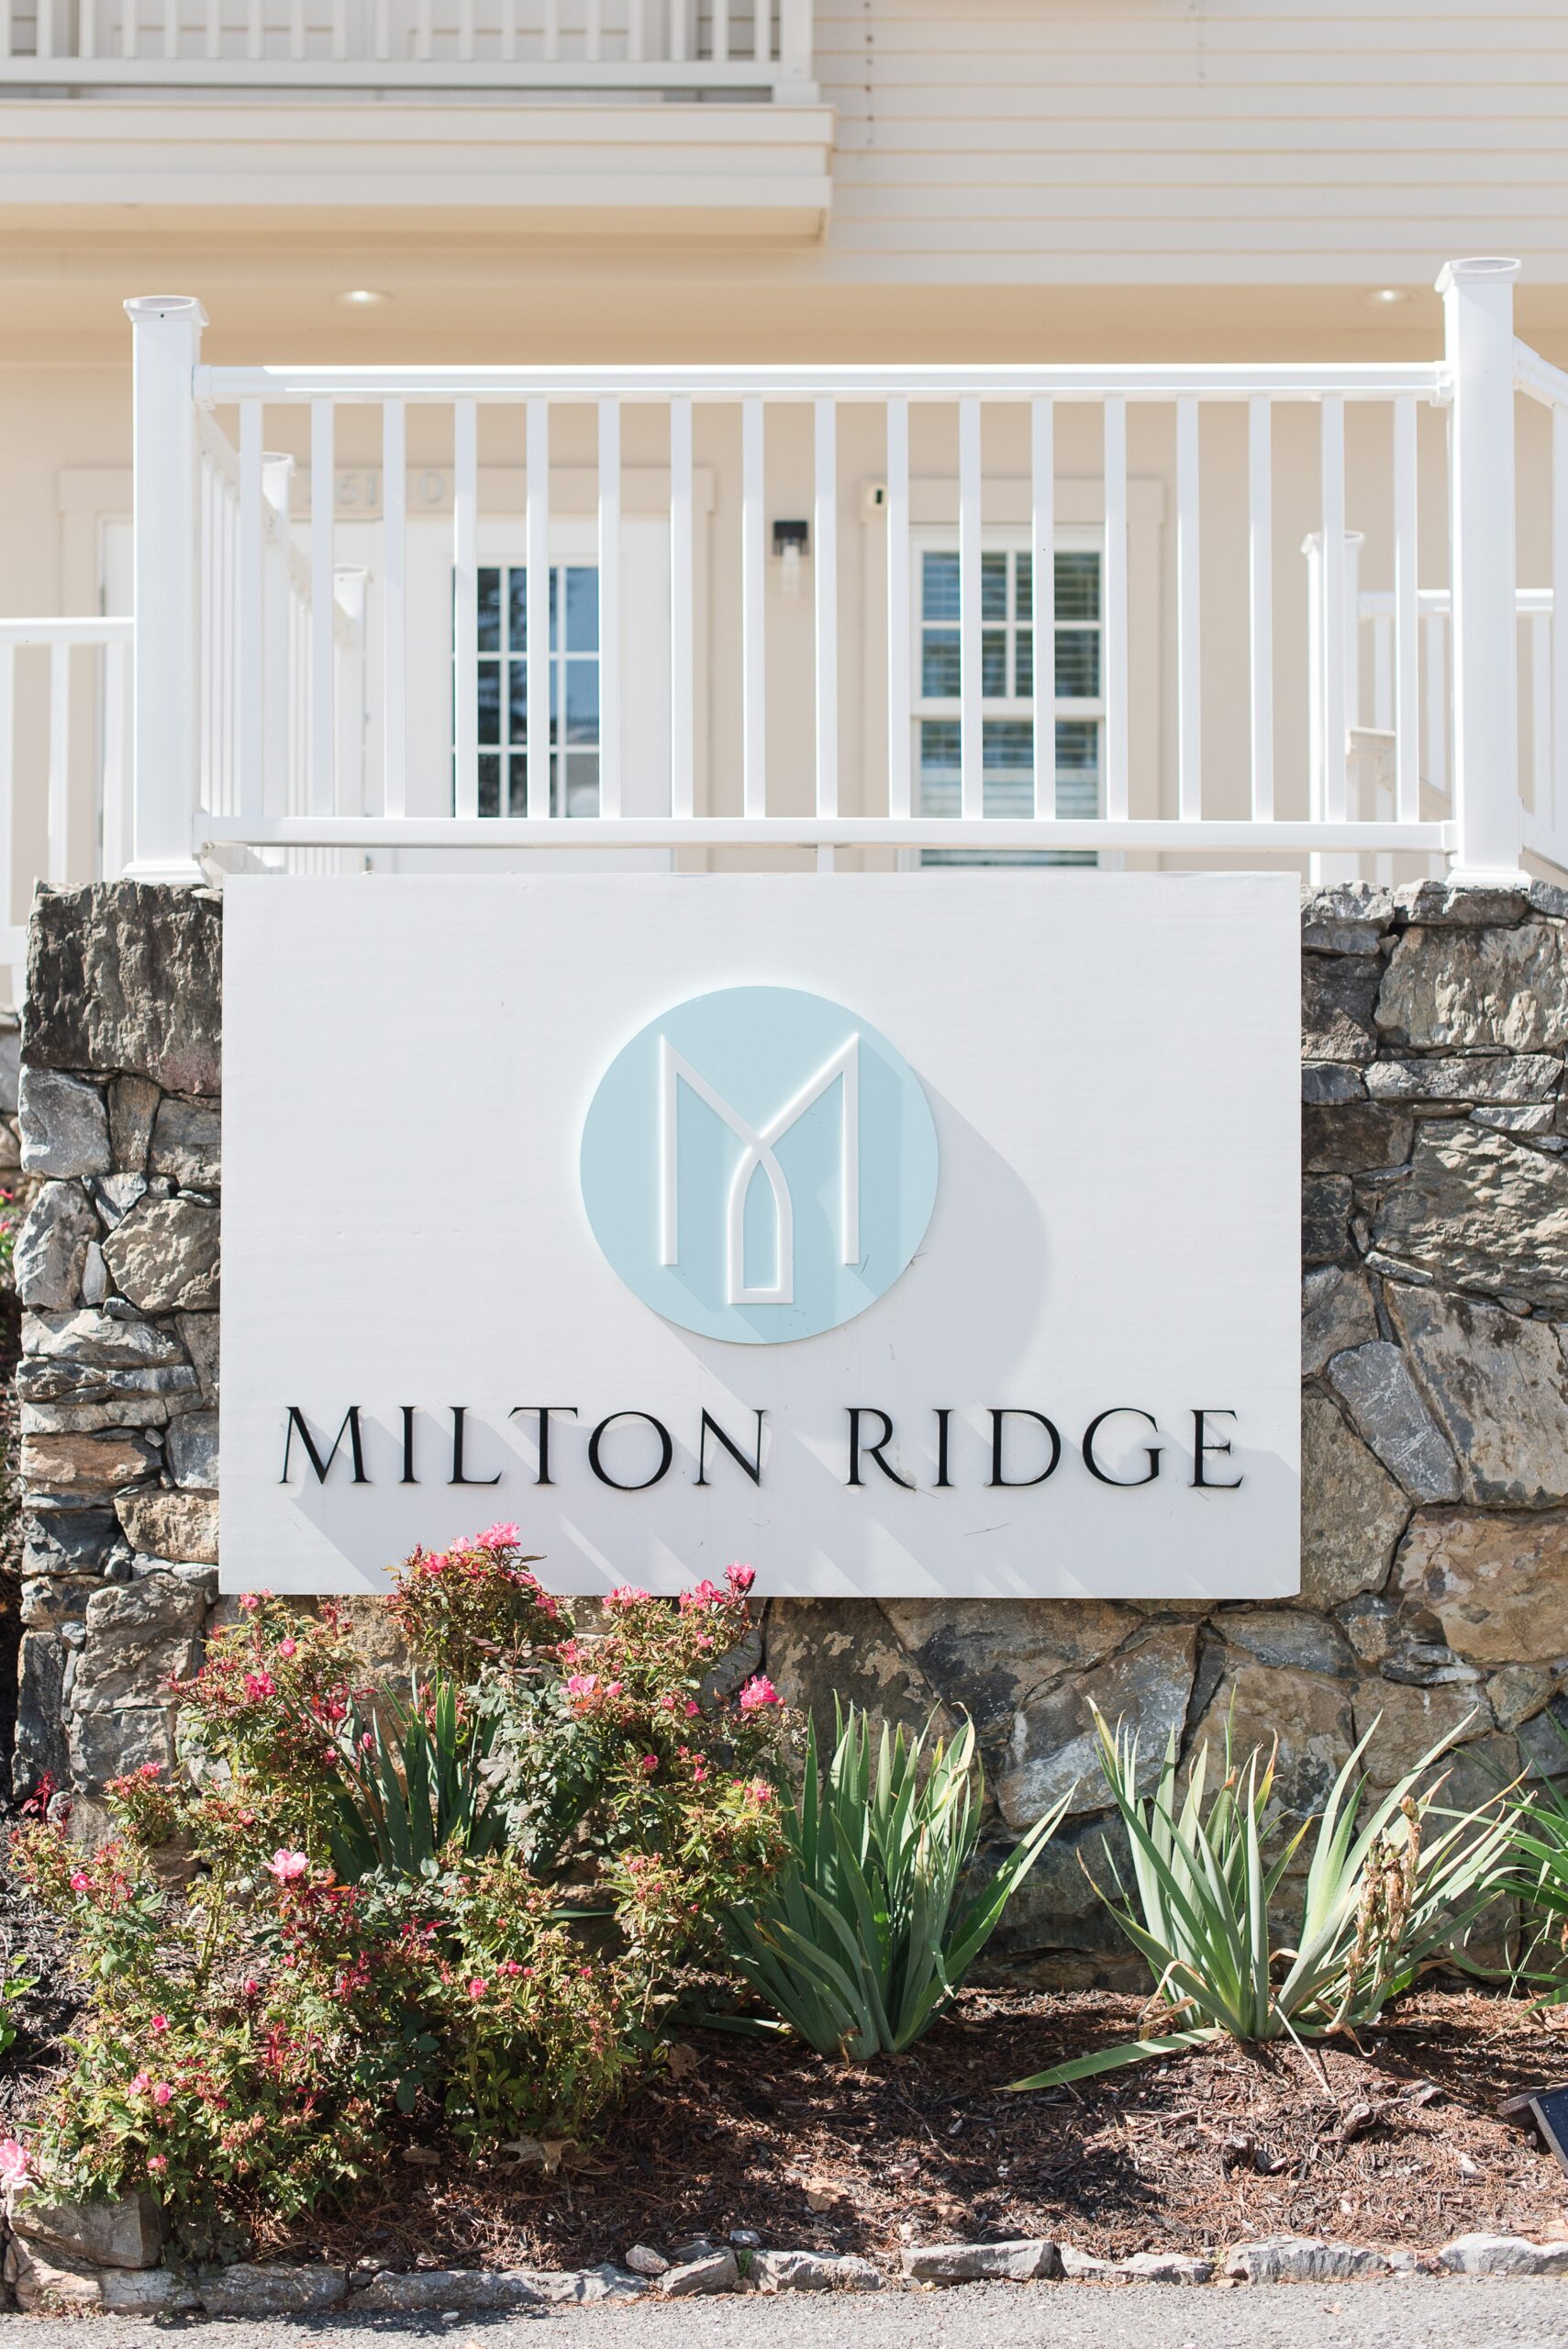 Details of the Milton Ridge Wedding venue sign on a stone wall